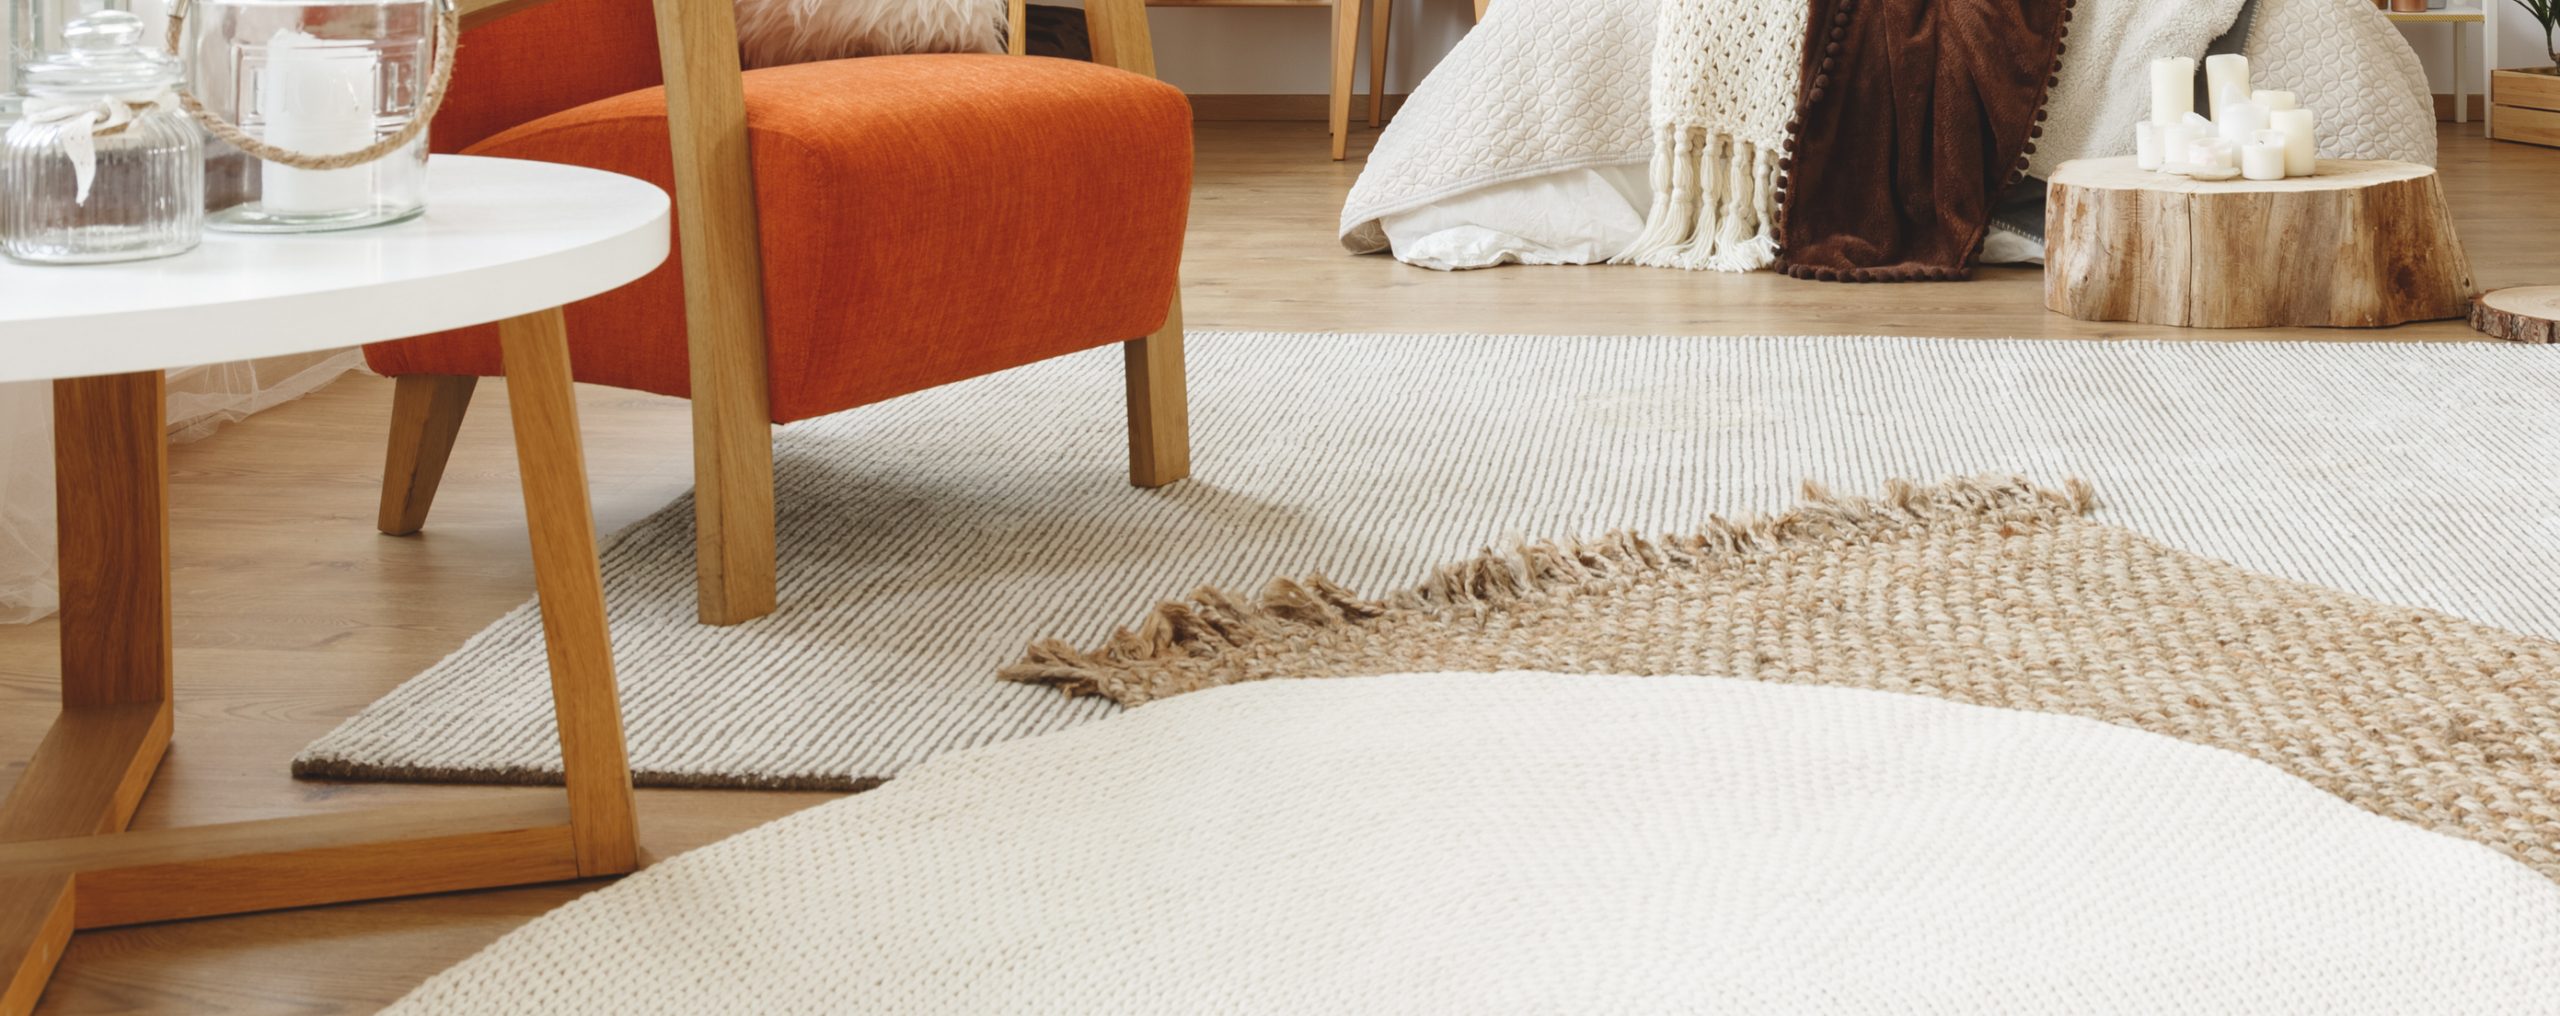 5 Best Rug Materials For High Traffic Areas